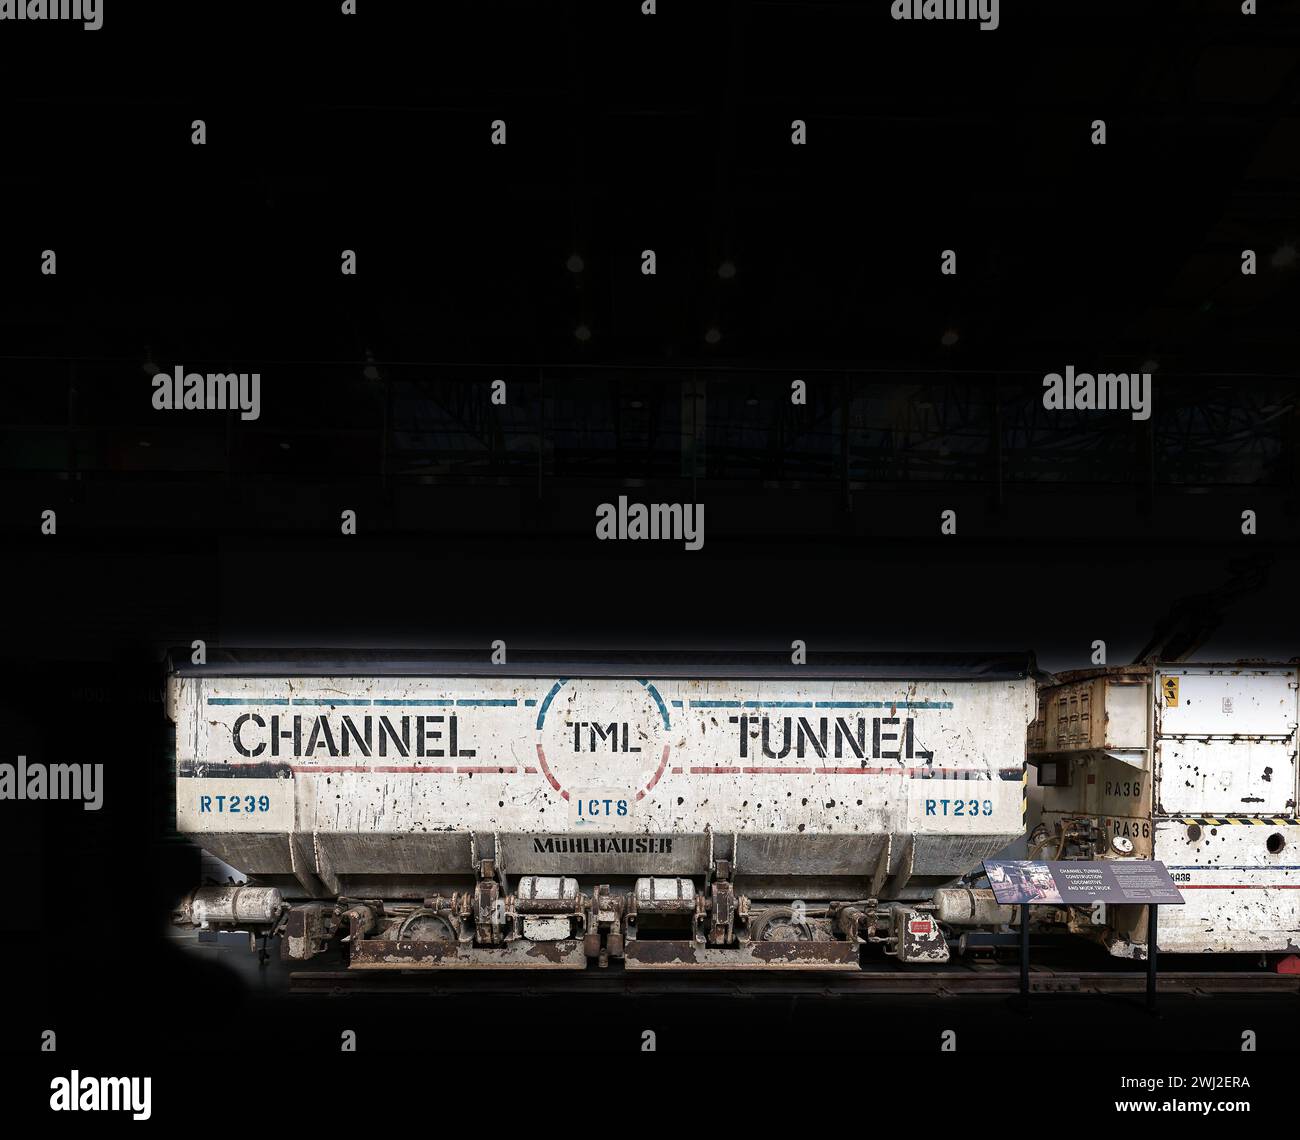 Channel Tunnel truck used to excavate material for the railway; rail museum, York, England. Stock Photo